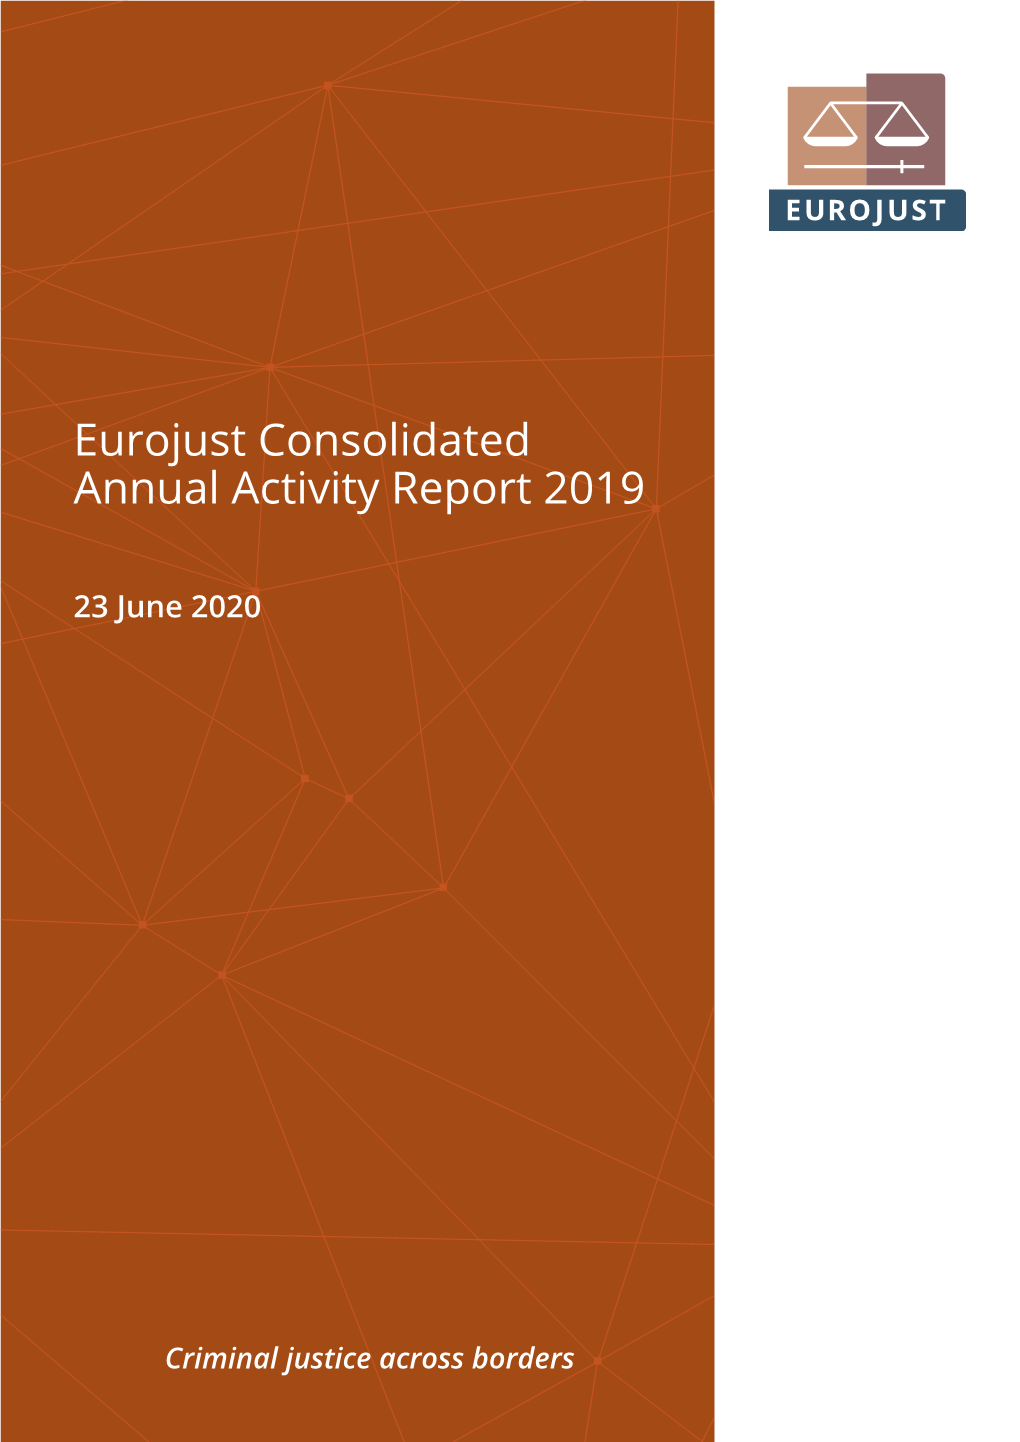 Cosolidated Annual Activity Report 2019